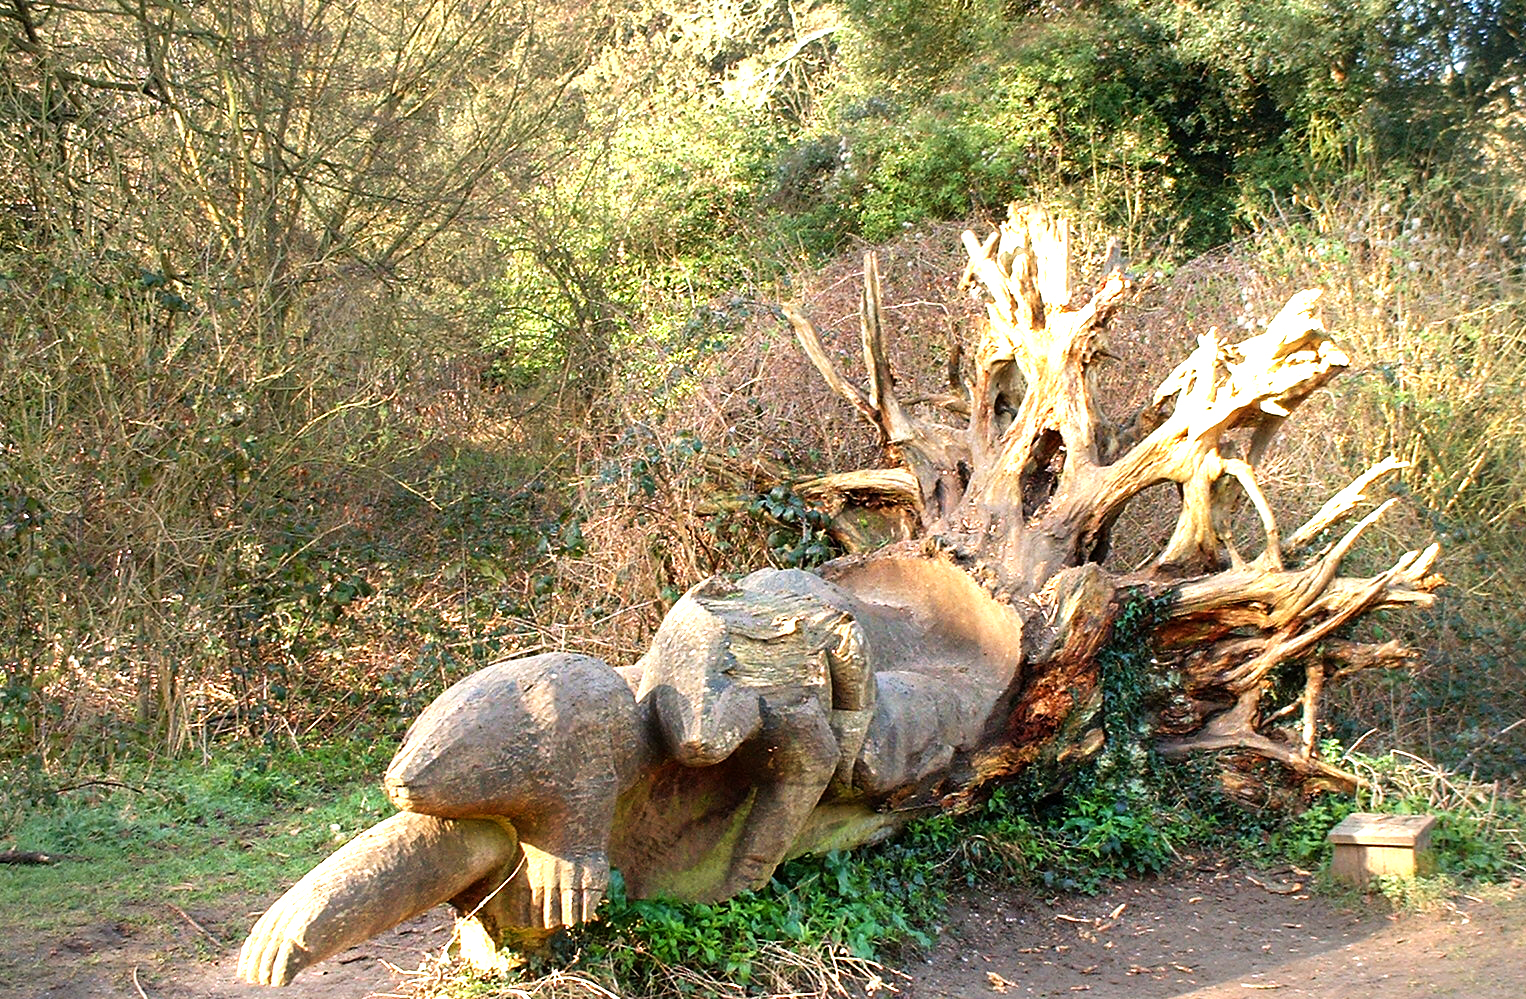 a large trunk on the ground next to some trees